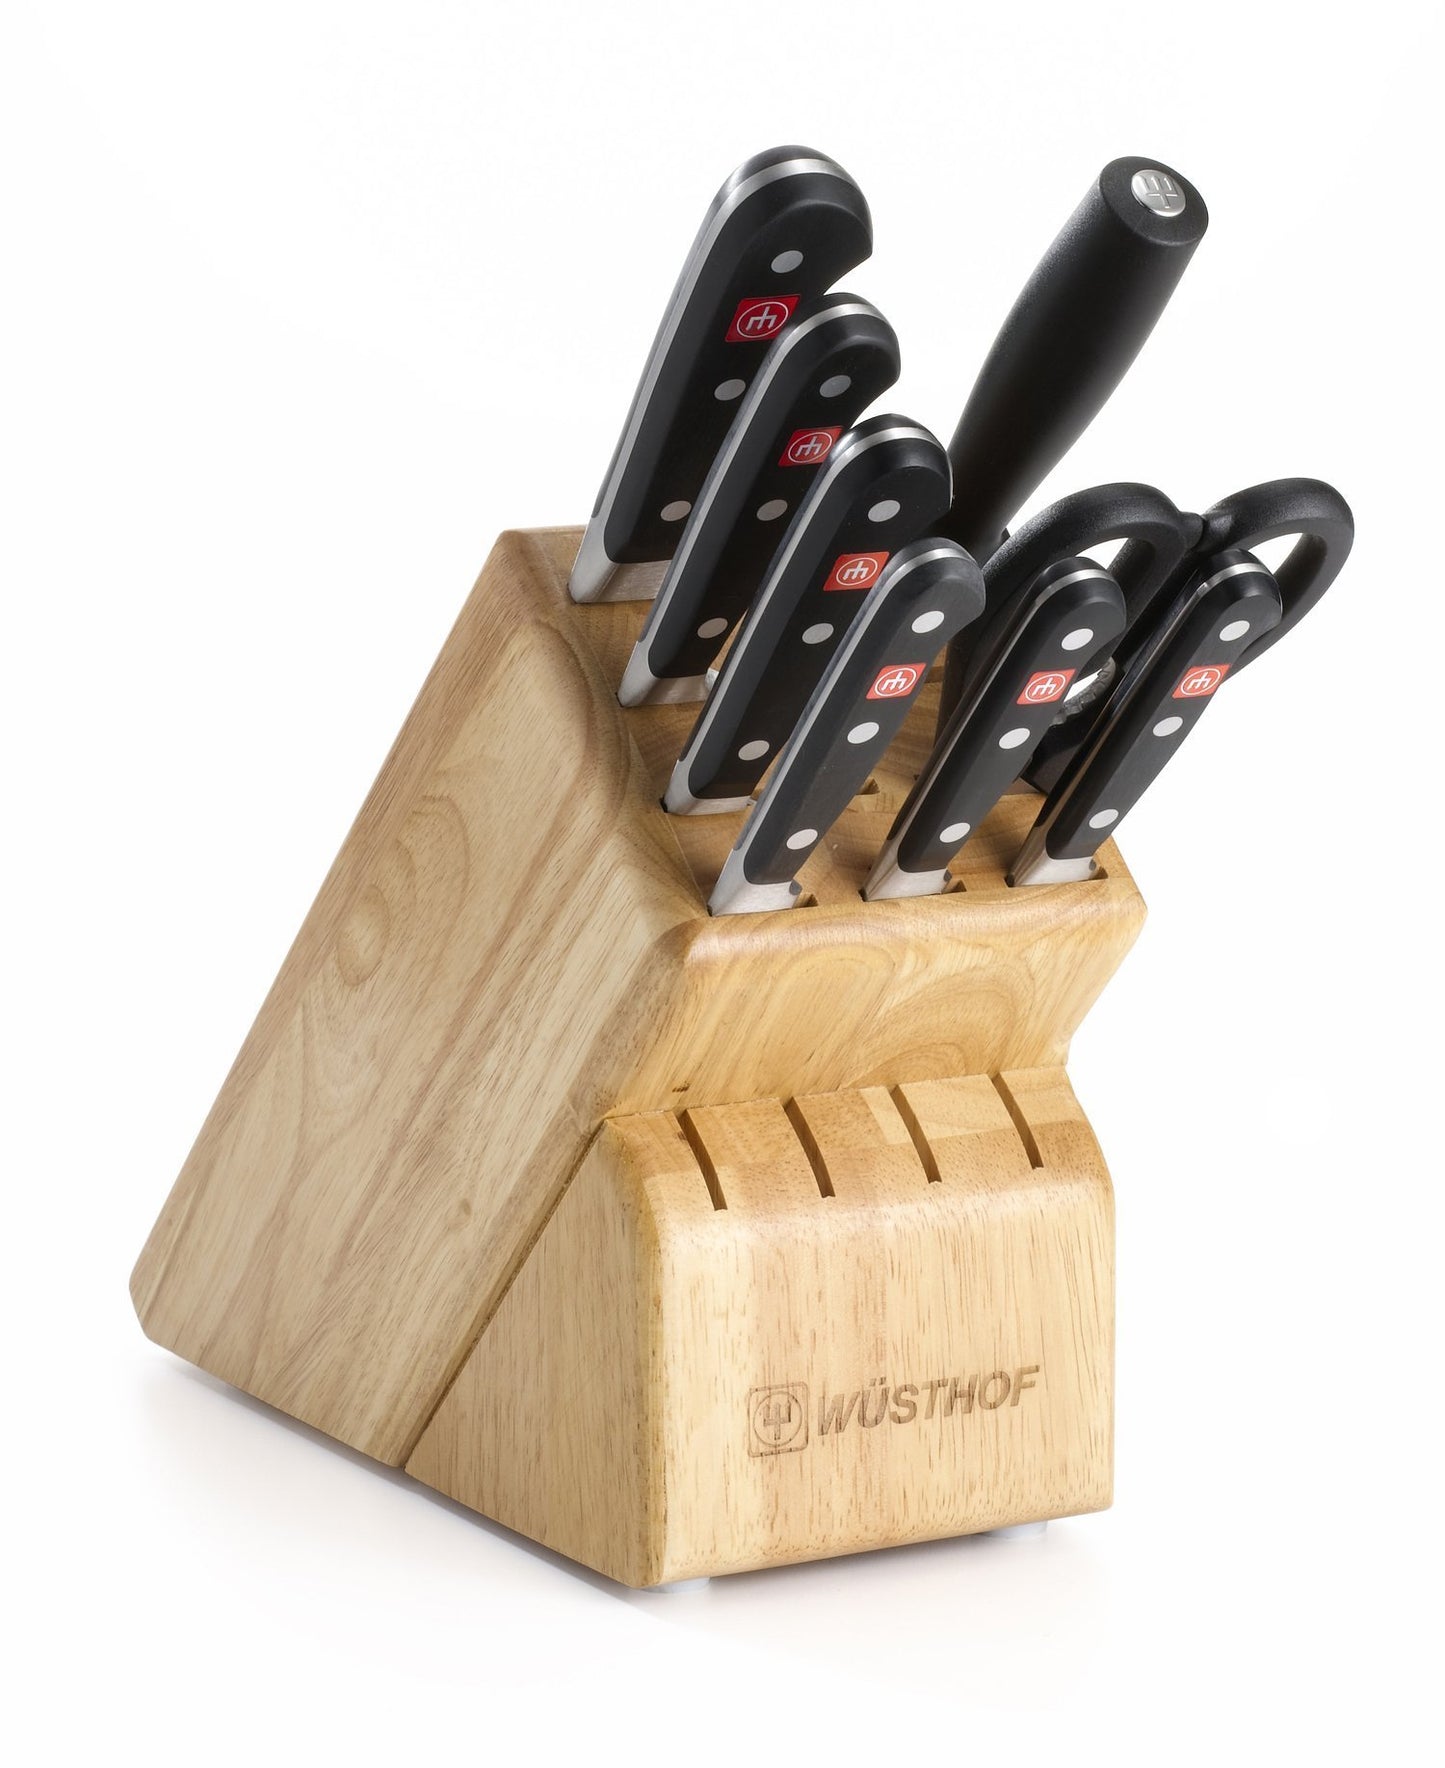 Budget friendly wusthof classic nine piece knife block set 9 piece german knife set precision forged high carbon stainless steel kitchen knife set with 13 slot wood block model 7419